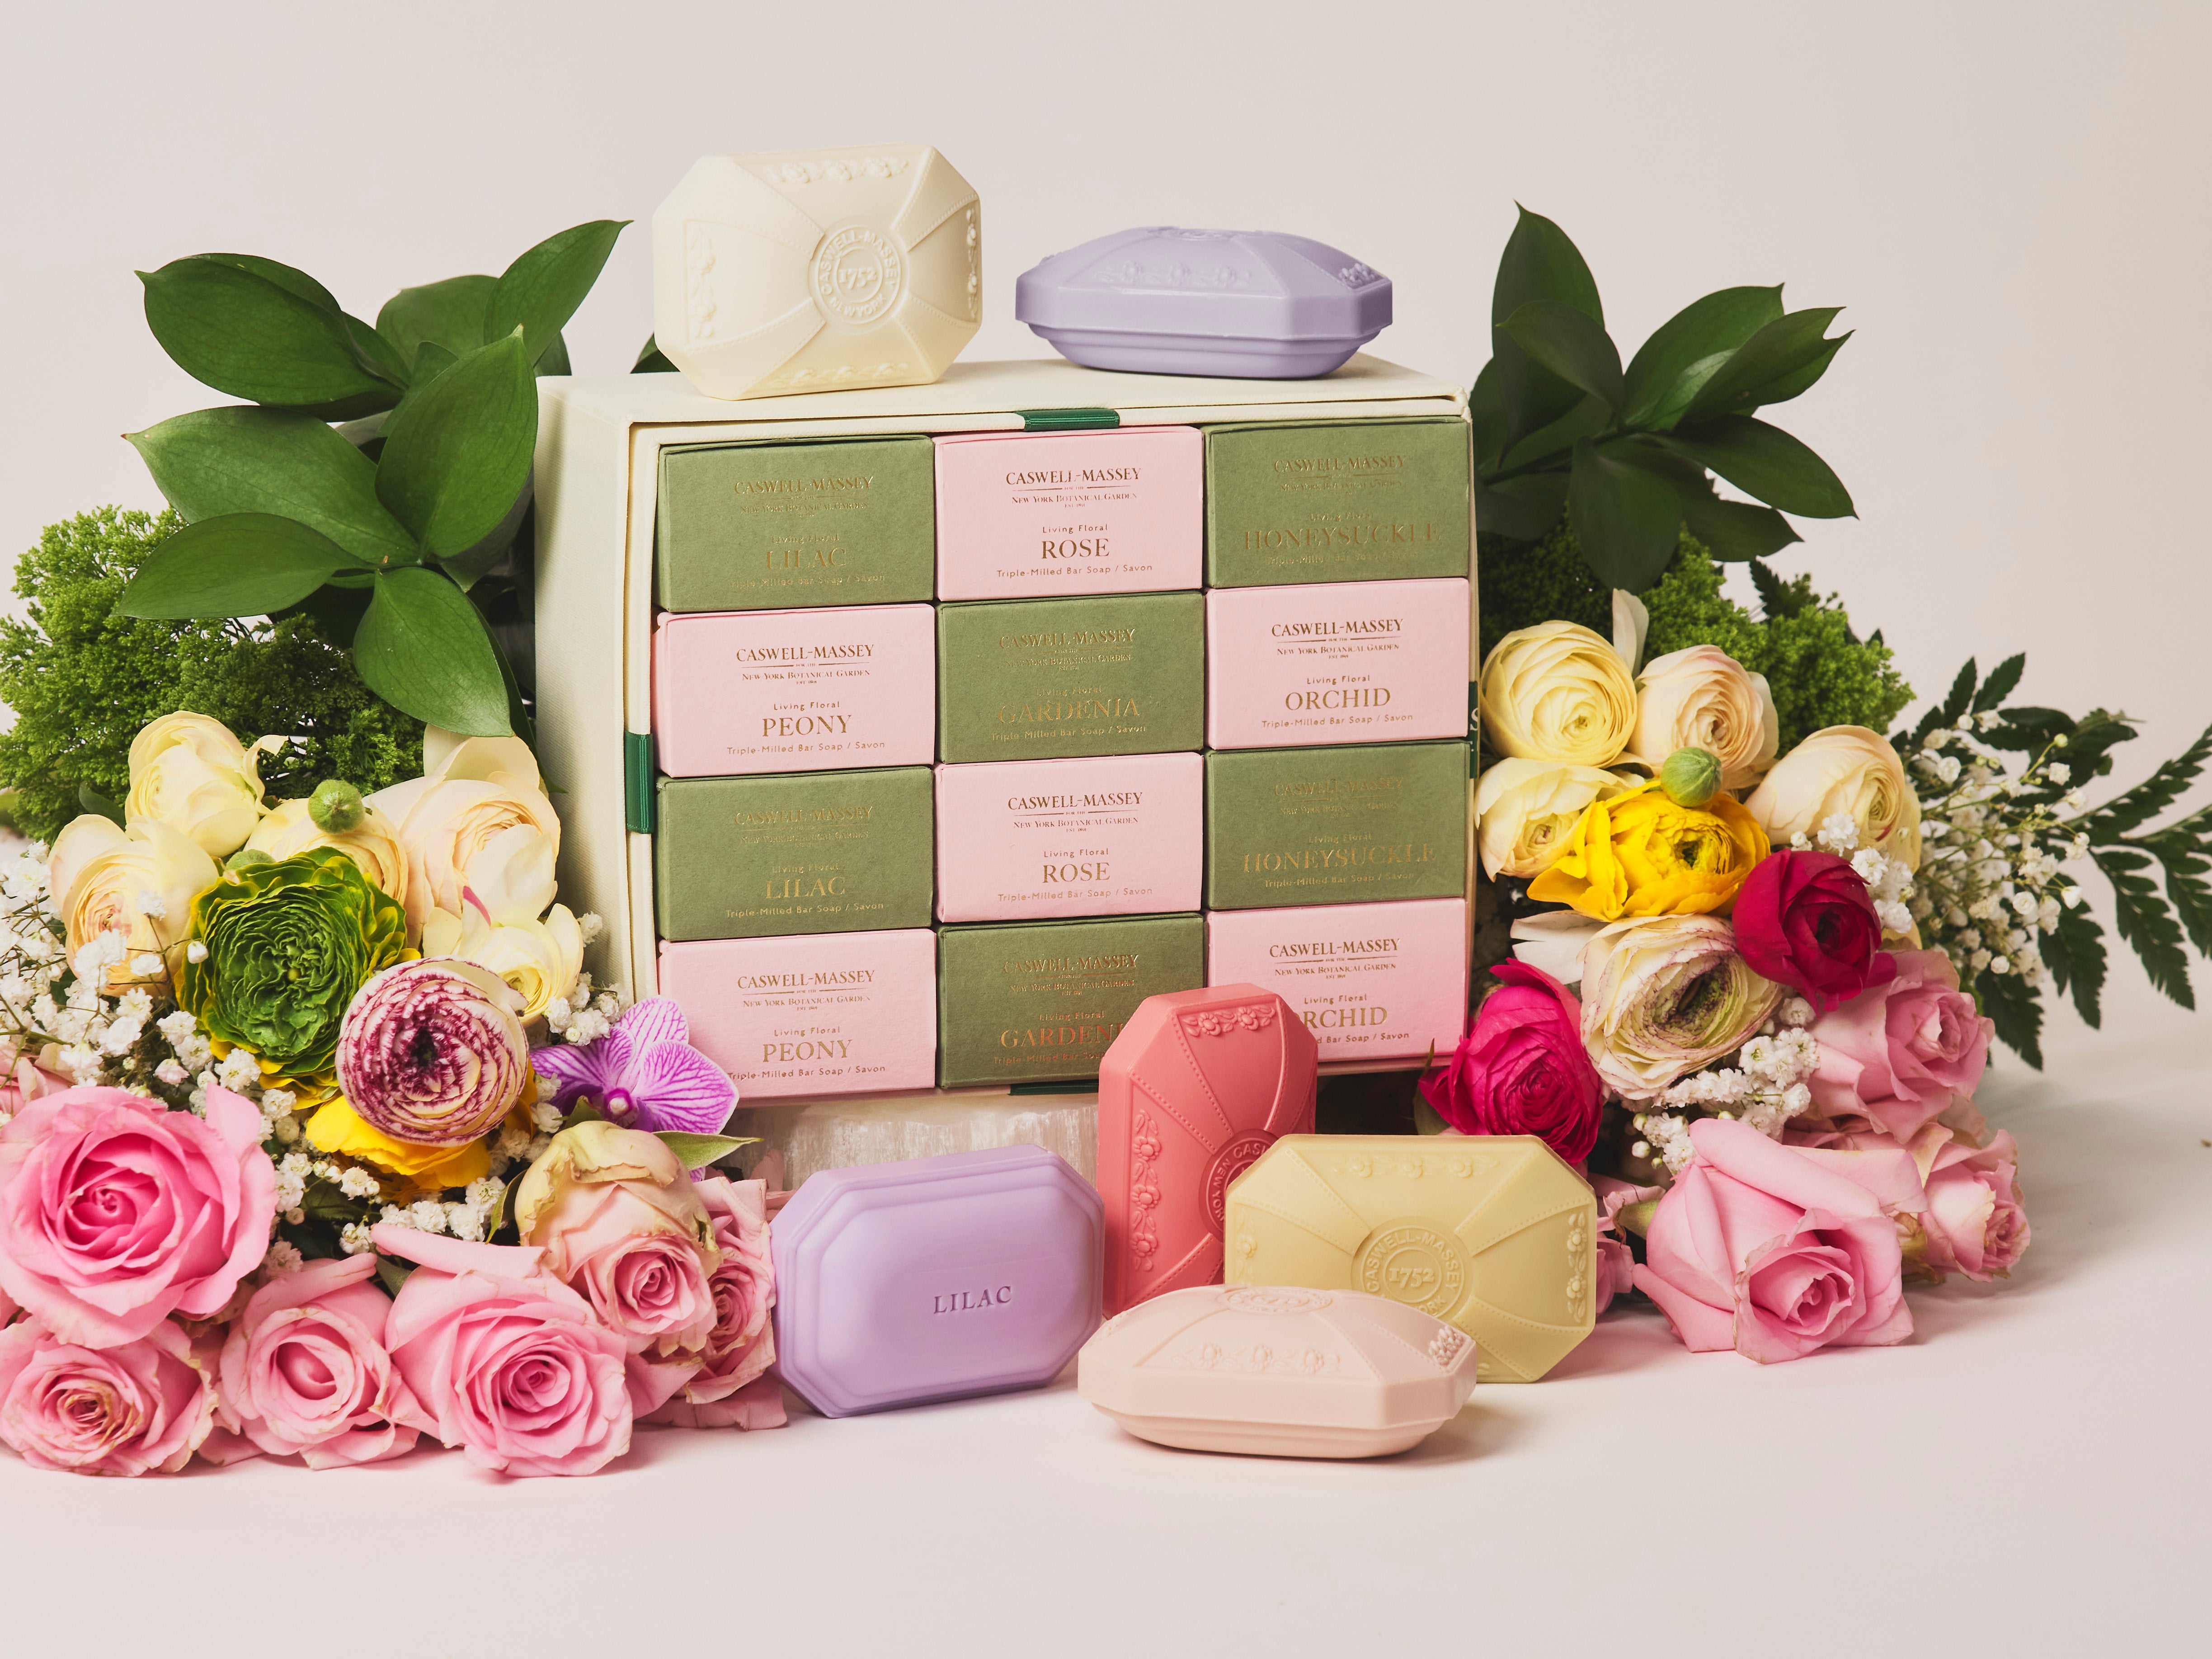 Caswell-Massey Designer Floral 12 Soap Gift Set shown surround by jewel-toned soaps and mixed floral bouquet